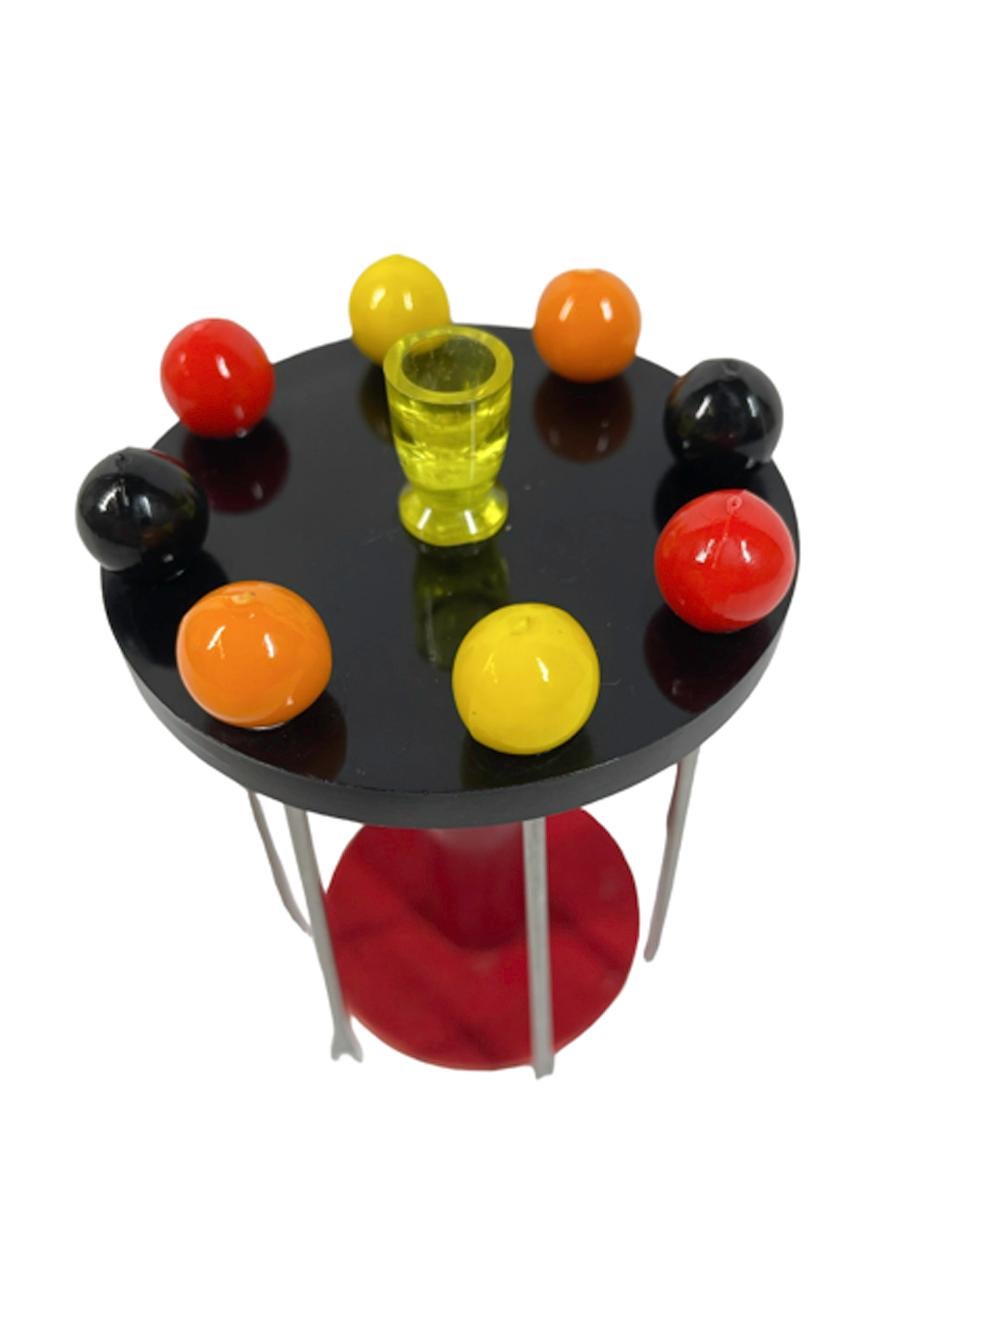 Set of eight cocktail picks and stand, 2 each of 4 color picks in steel with ball finials hang from the top of a table-form stand. The table with a black Bakelite top supported on a red Bakelite column sitting on a red felted disk, A translucent